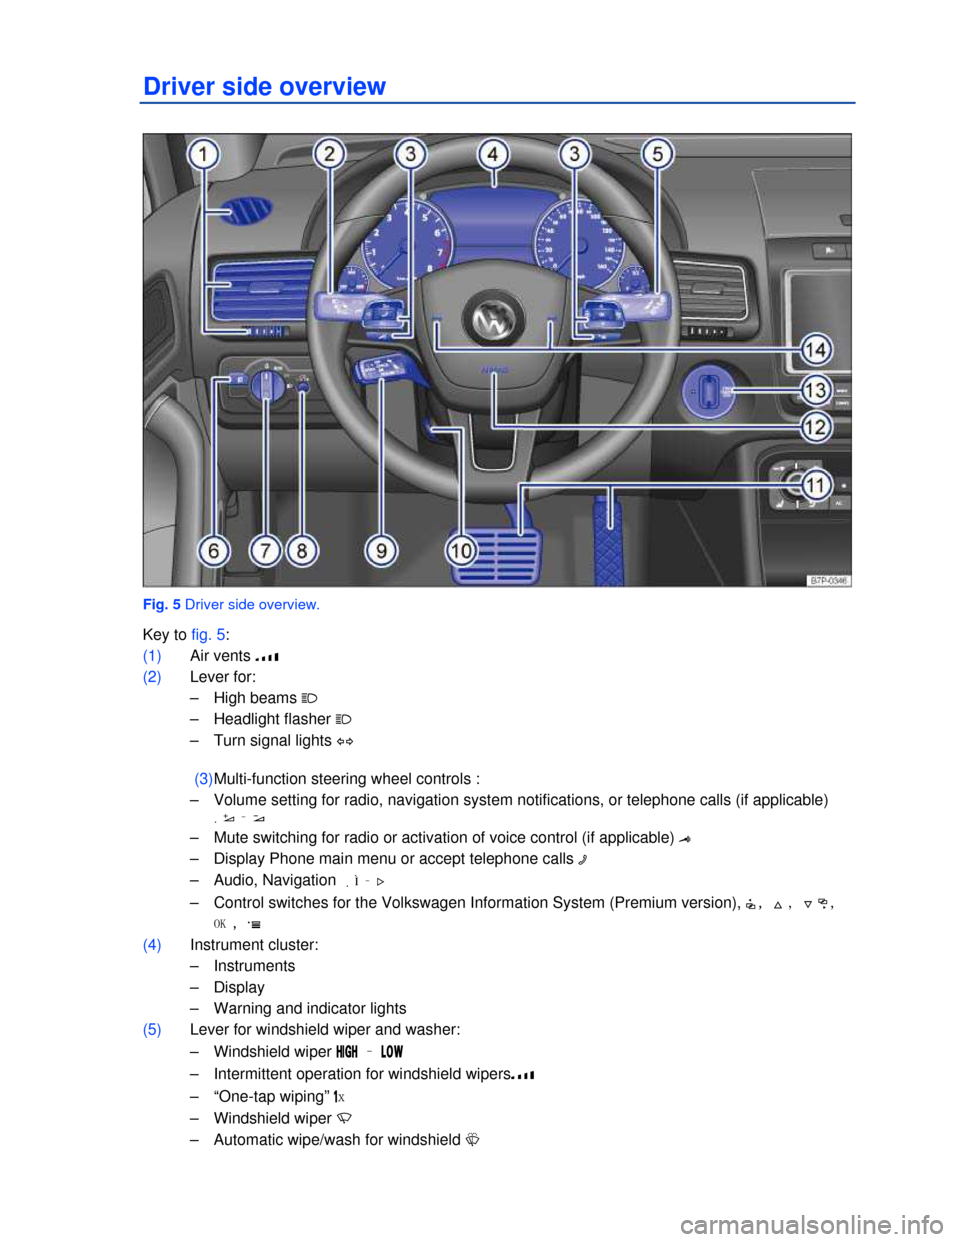 VOLKSWAGEN TOUAREG 2013 2.G Owners Manual  
Driver side overview 
 
Fig. 5 Driver side overview. 
Key to fig. 5: 
(1) Air vents �z  
(2) Lever for:  
–  High beams � 
–  Headlight flasher � 
–  Turn signal lights � 
 
 (3) Multi-func